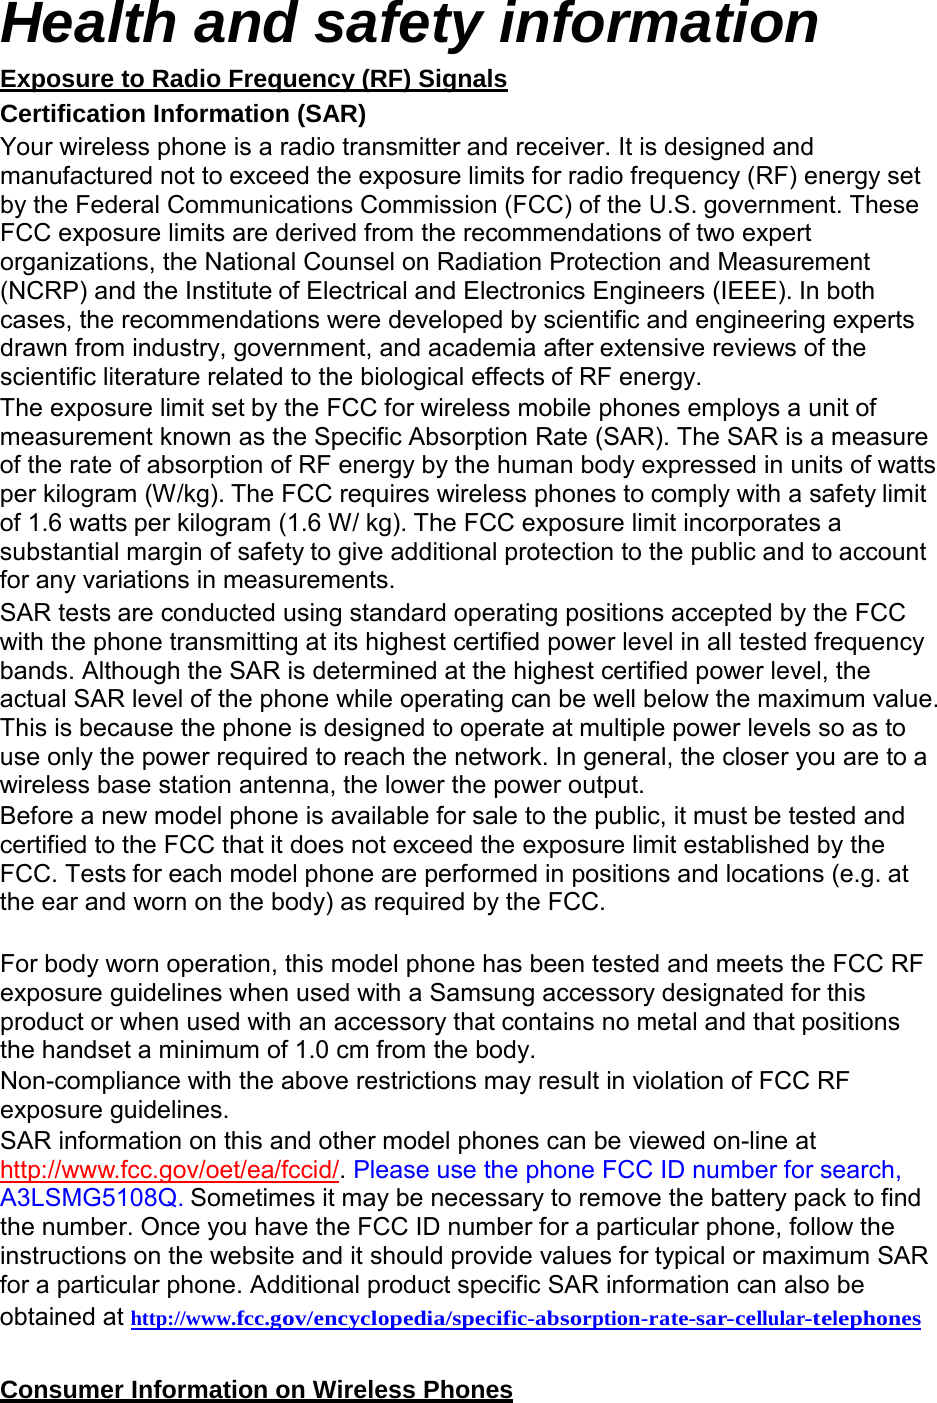  Health and safety information Exposure to Radio Frequency (RF) Signals Certification Information (SAR) Your wireless phone is a radio transmitter and receiver. It is designed and manufactured not to exceed the exposure limits for radio frequency (RF) energy set by the Federal Communications Commission (FCC) of the U.S. government. These FCC exposure limits are derived from the recommendations of two expert organizations, the National Counsel on Radiation Protection and Measurement (NCRP) and the Institute of Electrical and Electronics Engineers (IEEE). In both cases, the recommendations were developed by scientific and engineering experts drawn from industry, government, and academia after extensive reviews of the scientific literature related to the biological effects of RF energy. The exposure limit set by the FCC for wireless mobile phones employs a unit of measurement known as the Specific Absorption Rate (SAR). The SAR is a measure of the rate of absorption of RF energy by the human body expressed in units of watts per kilogram (W/kg). The FCC requires wireless phones to comply with a safety limit of 1.6 watts per kilogram (1.6 W/ kg). The FCC exposure limit incorporates a substantial margin of safety to give additional protection to the public and to account for any variations in measurements. SAR tests are conducted using standard operating positions accepted by the FCC with the phone transmitting at its highest certified power level in all tested frequency bands. Although the SAR is determined at the highest certified power level, the actual SAR level of the phone while operating can be well below the maximum value. This is because the phone is designed to operate at multiple power levels so as to use only the power required to reach the network. In general, the closer you are to a wireless base station antenna, the lower the power output. Before a new model phone is available for sale to the public, it must be tested and certified to the FCC that it does not exceed the exposure limit established by the FCC. Tests for each model phone are performed in positions and locations (e.g. at the ear and worn on the body) as required by the FCC.   For body worn operation, this model phone has been tested and meets the FCC RF exposure guidelines when used with a Samsung accessory designated for this product or when used with an accessory that contains no metal and that positions the handset a minimum of 1.0 cm from the body. Non-compliance with the above restrictions may result in violation of FCC RF exposure guidelines. SAR information on this and other model phones can be viewed on-line at http://www.fcc.gov/oet/ea/fccid/. Please use the phone FCC ID number for search, A3LSMG5108Q. Sometimes it may be necessary to remove the battery pack to find the number. Once you have the FCC ID number for a particular phone, follow the instructions on the website and it should provide values for typical or maximum SAR for a particular phone. Additional product specific SAR information can also be obtained at  http://www.fcc.gov/encyclopedia/specific-absorption-rate-sar-cellular-telephones   Consumer Information on Wireless Phones 